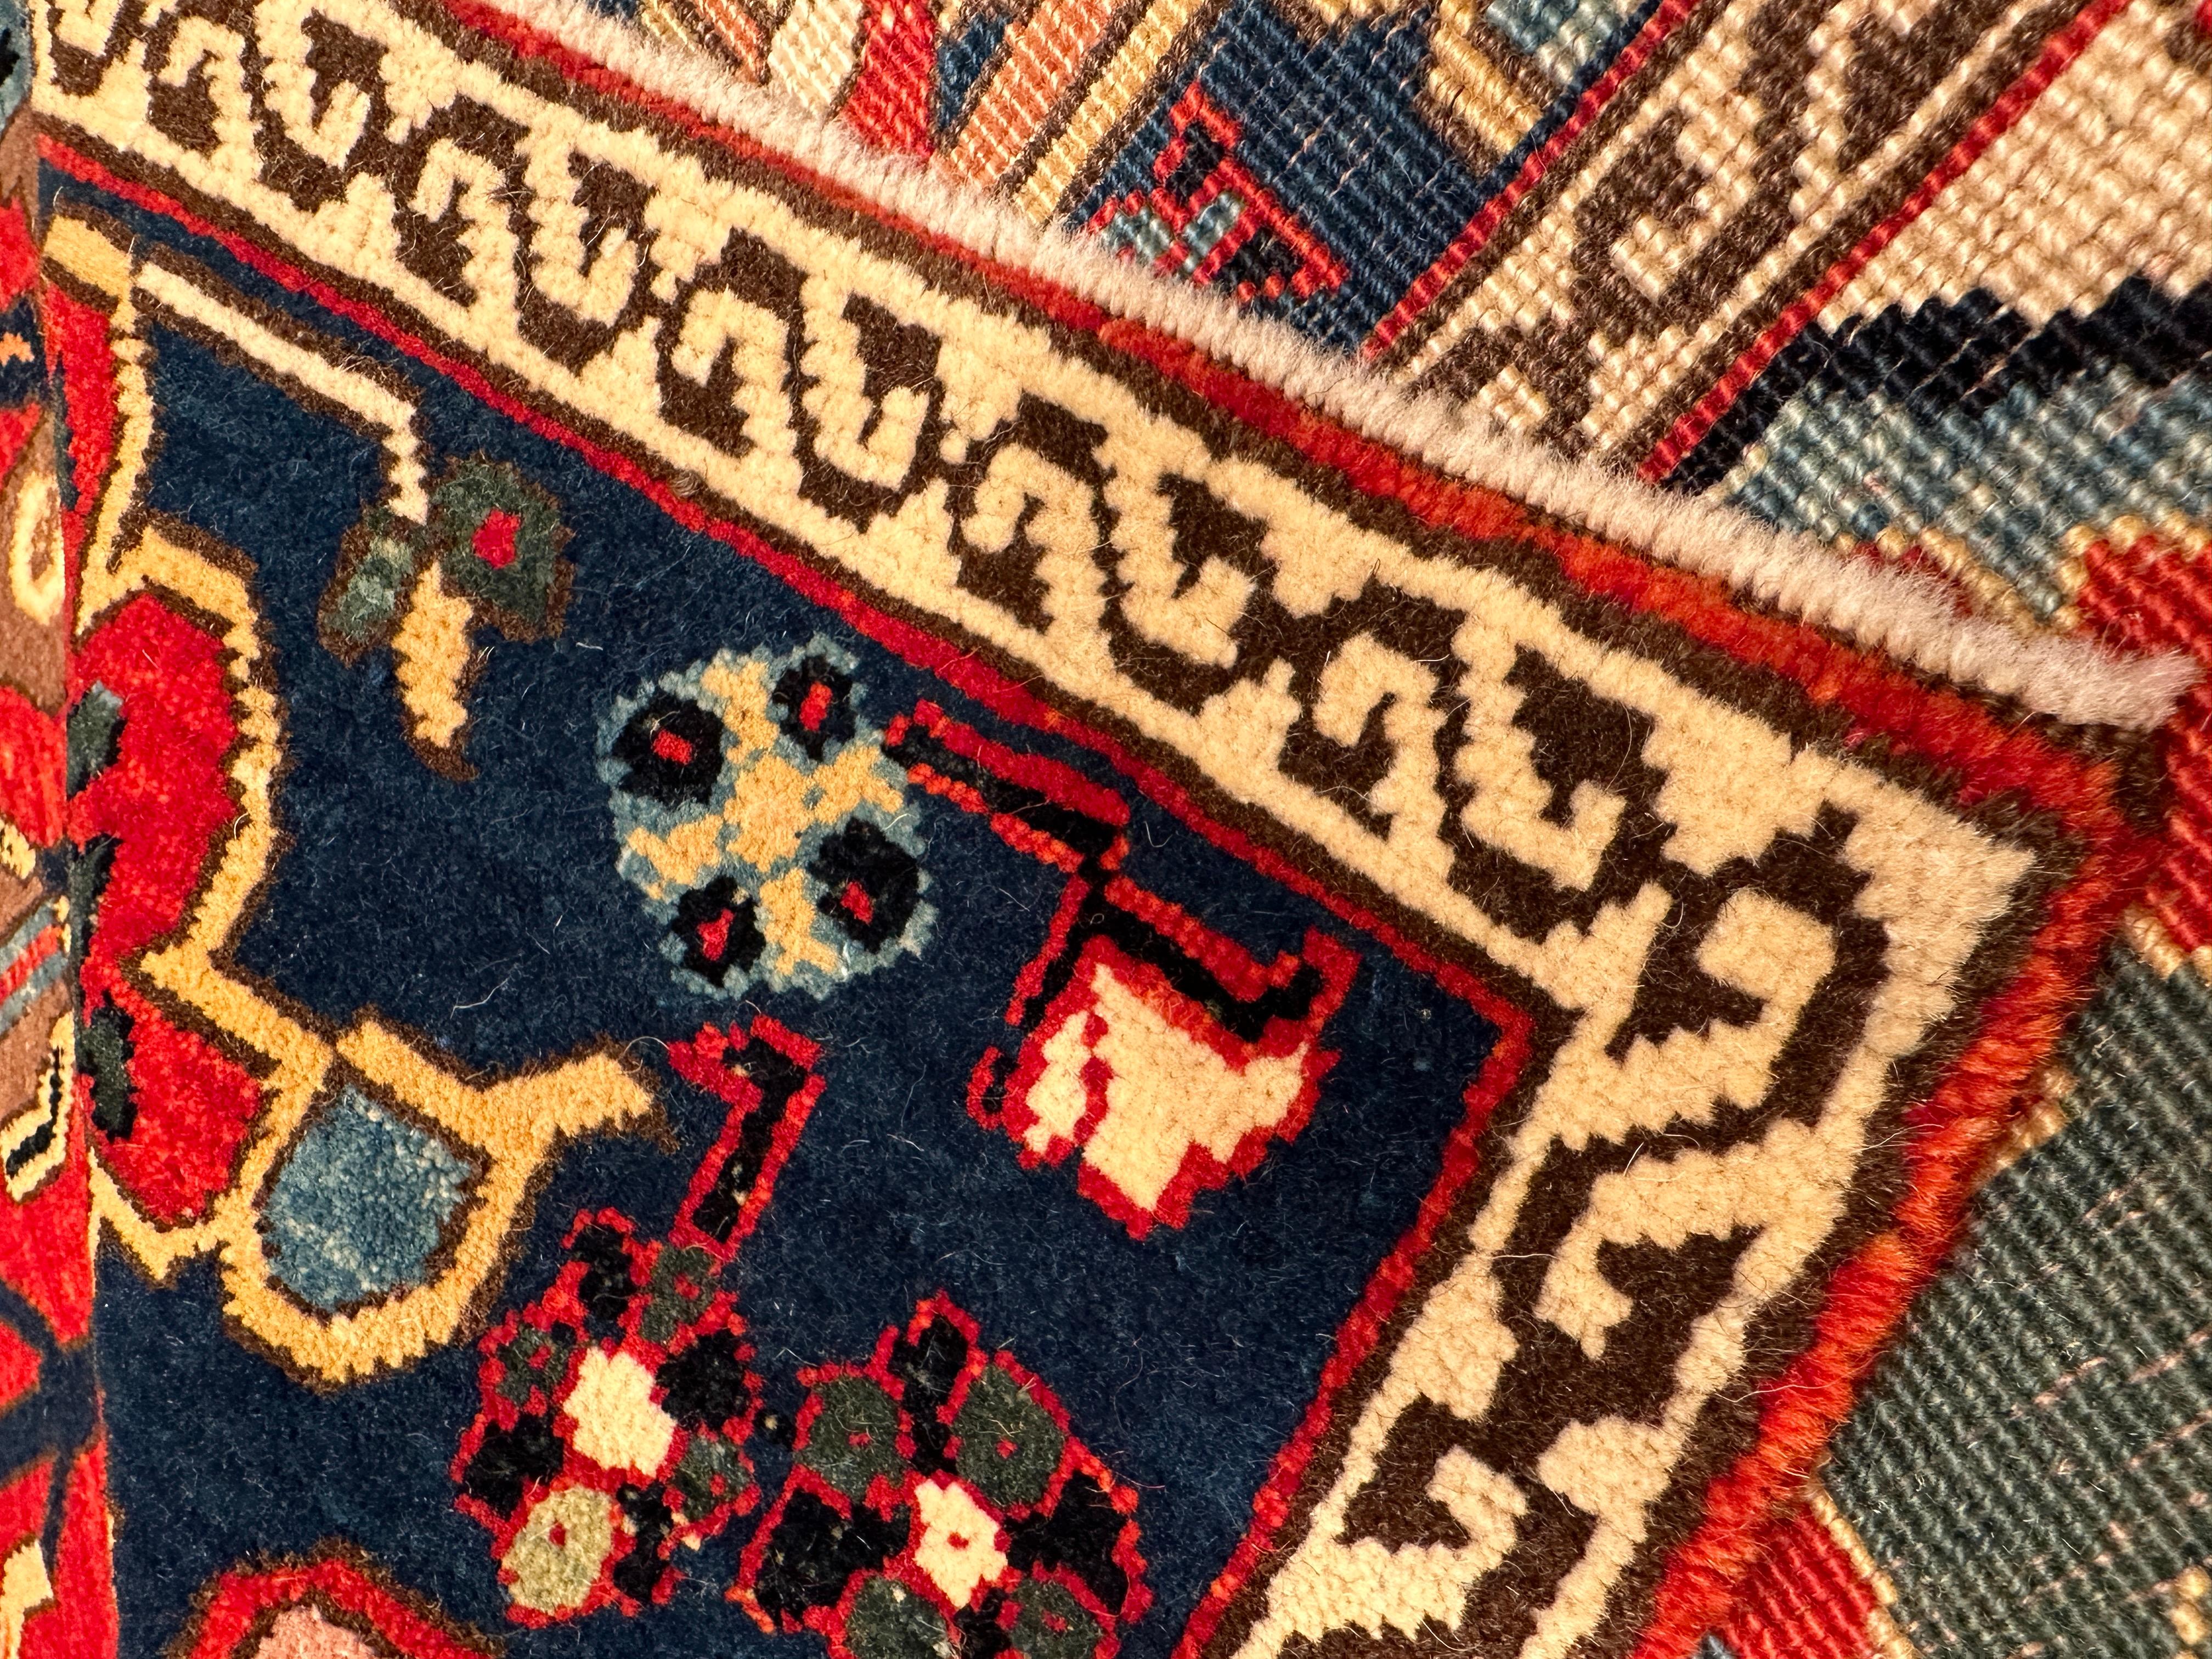 The source of the carpet comes from the book The Kevorkoff Carpet, Hali Magazine 1994 Issue 73. This is a large and brilliantly colored, derivation from a vase carpet, an 18th century rug from the North-west Persia area. As mentioned in the Hali